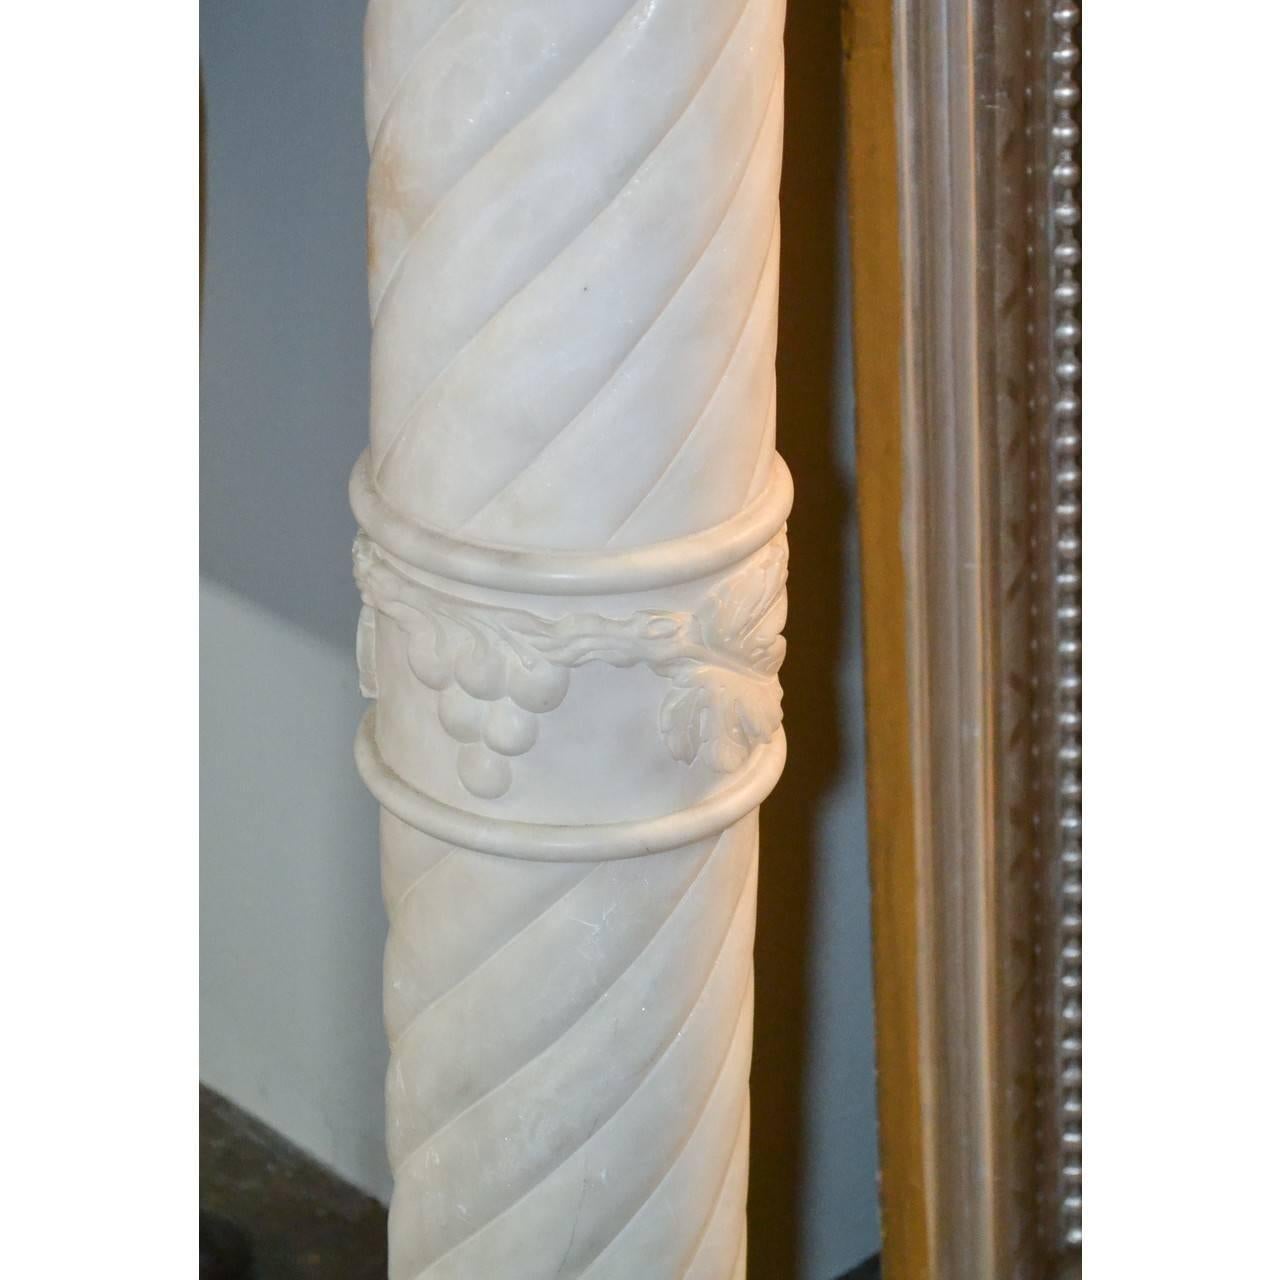 Elegant Continental vintage white marble pedestal.
Measure: 39 inches height
10 inches x 10 inches top.